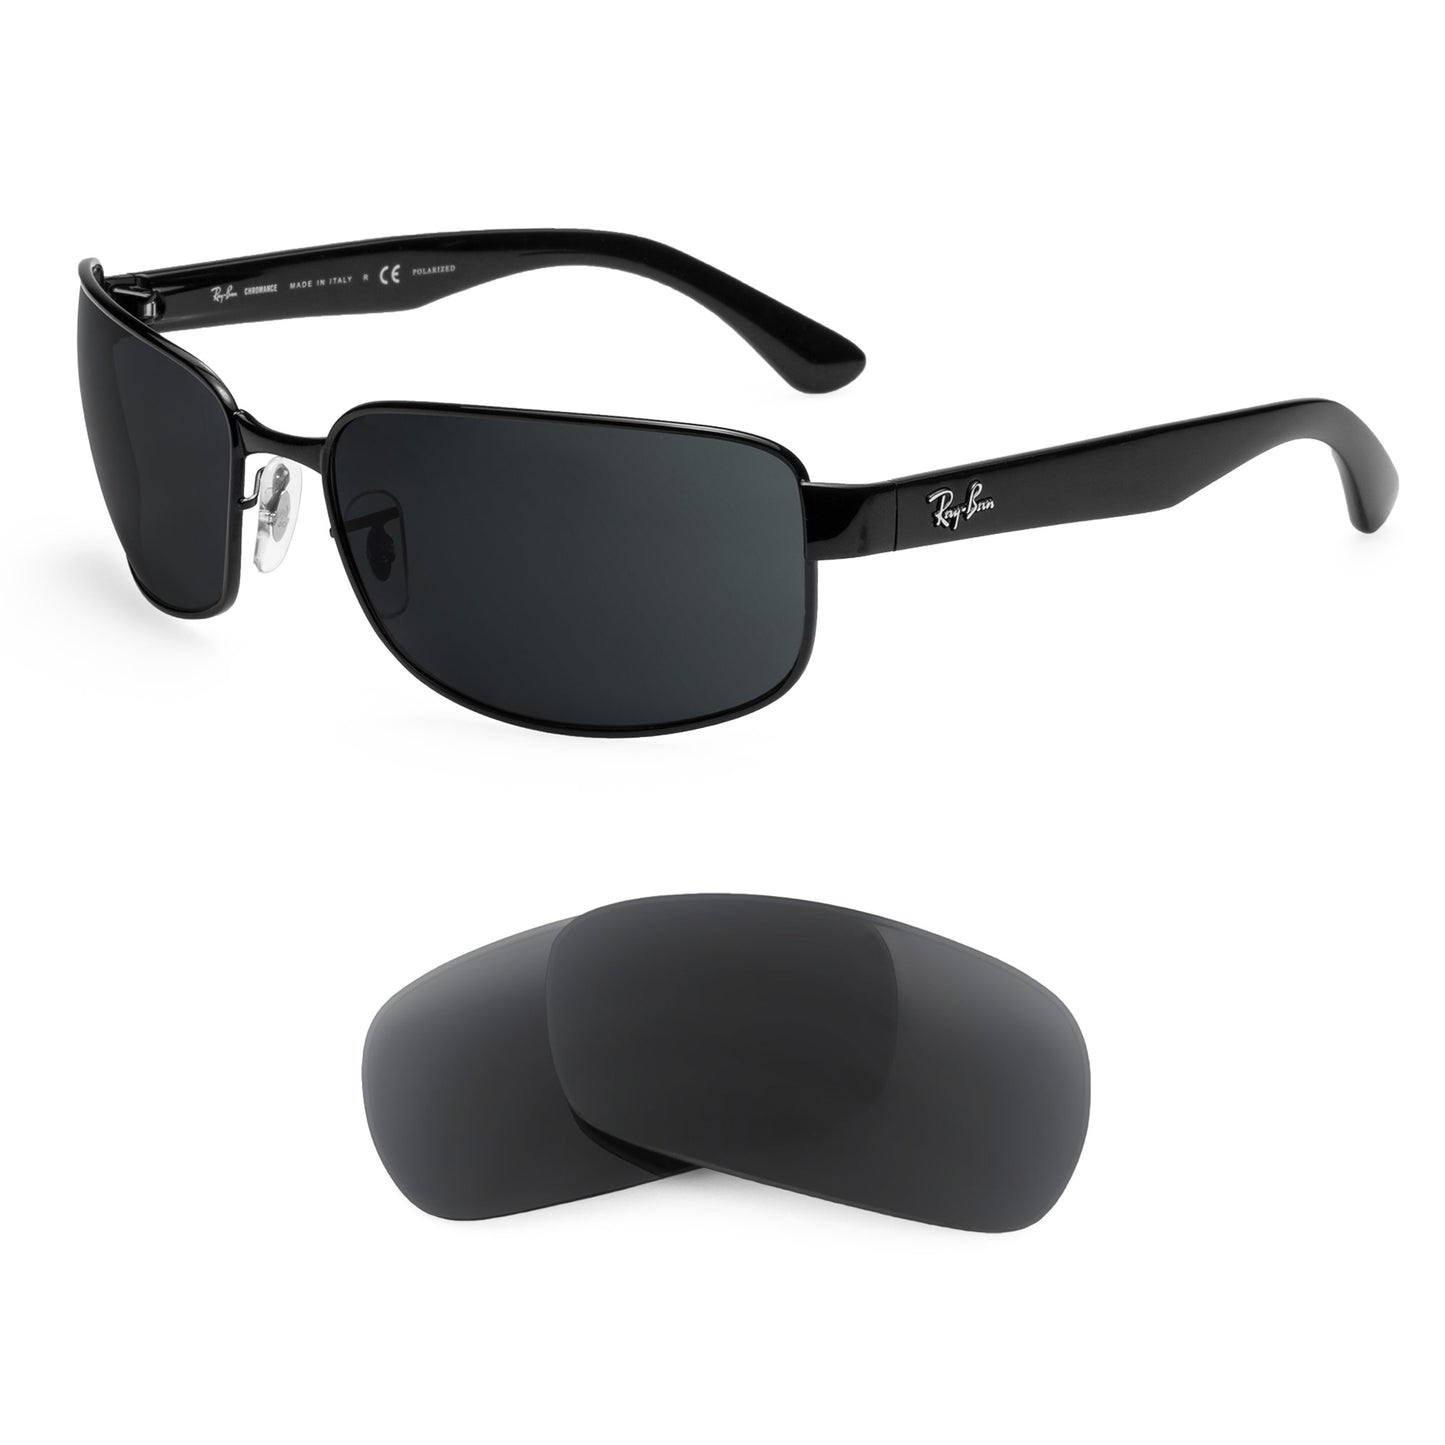 Ray-Ban RB3566 65mm sunglasses with replacement lenses